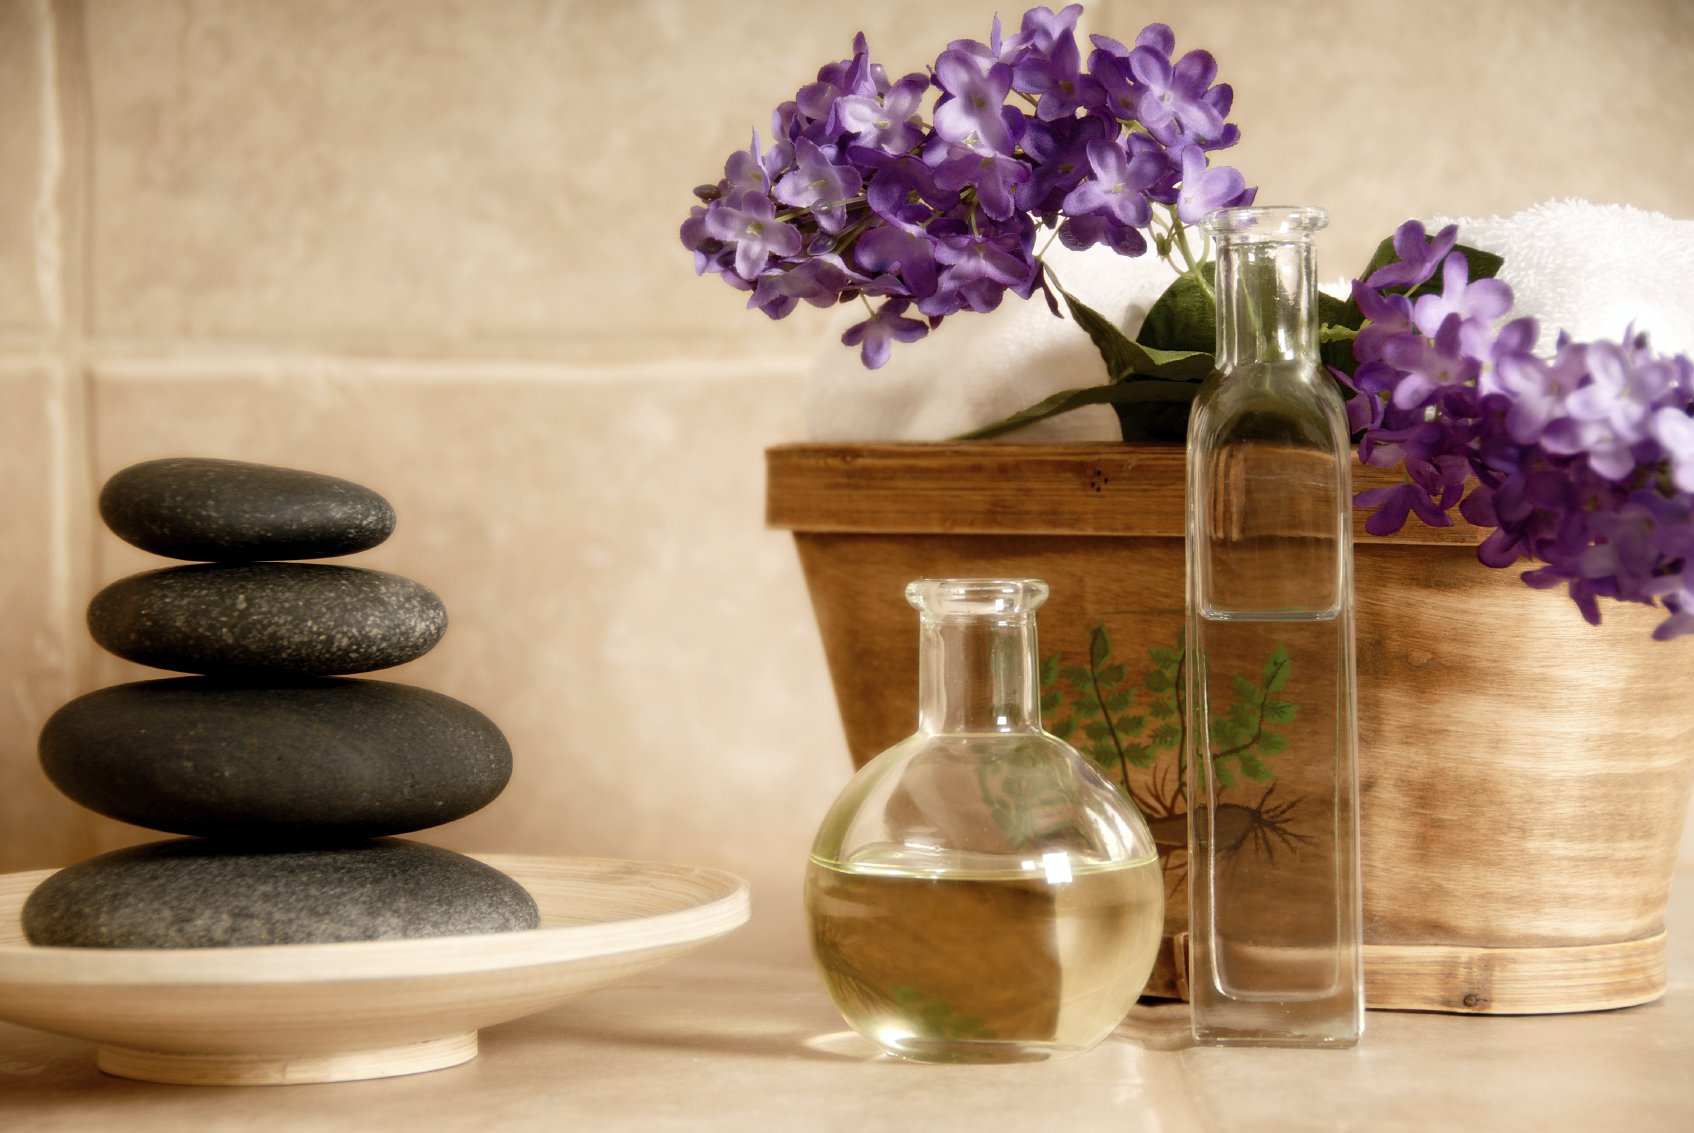 What’s Spa soap for you?